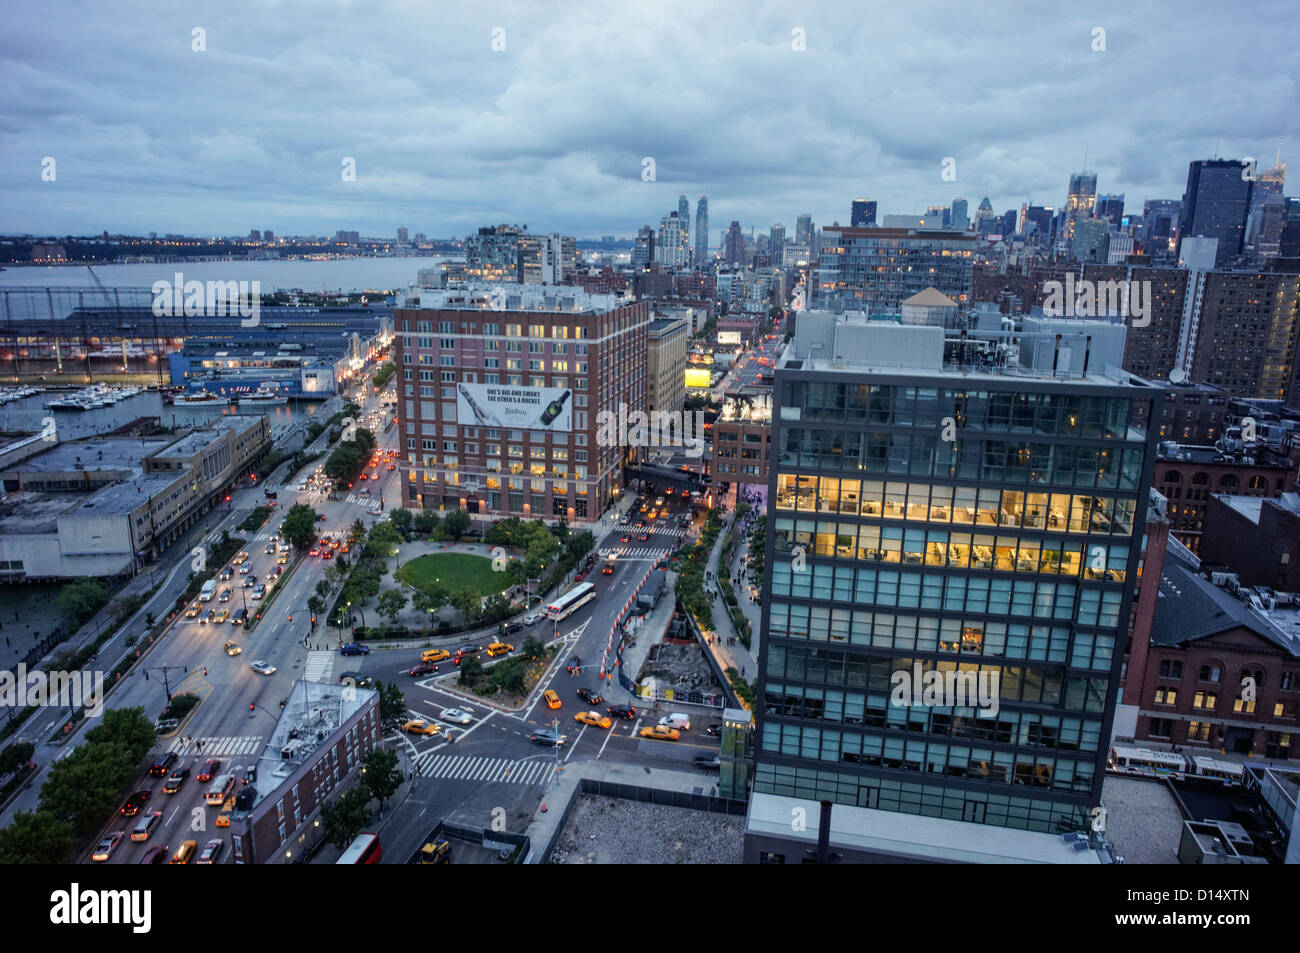 Antibiotika Fejde God følelse View from Standard Hotel Top Floor to Meatpacking district, High Line, New  York City Stock Photo - Alamy